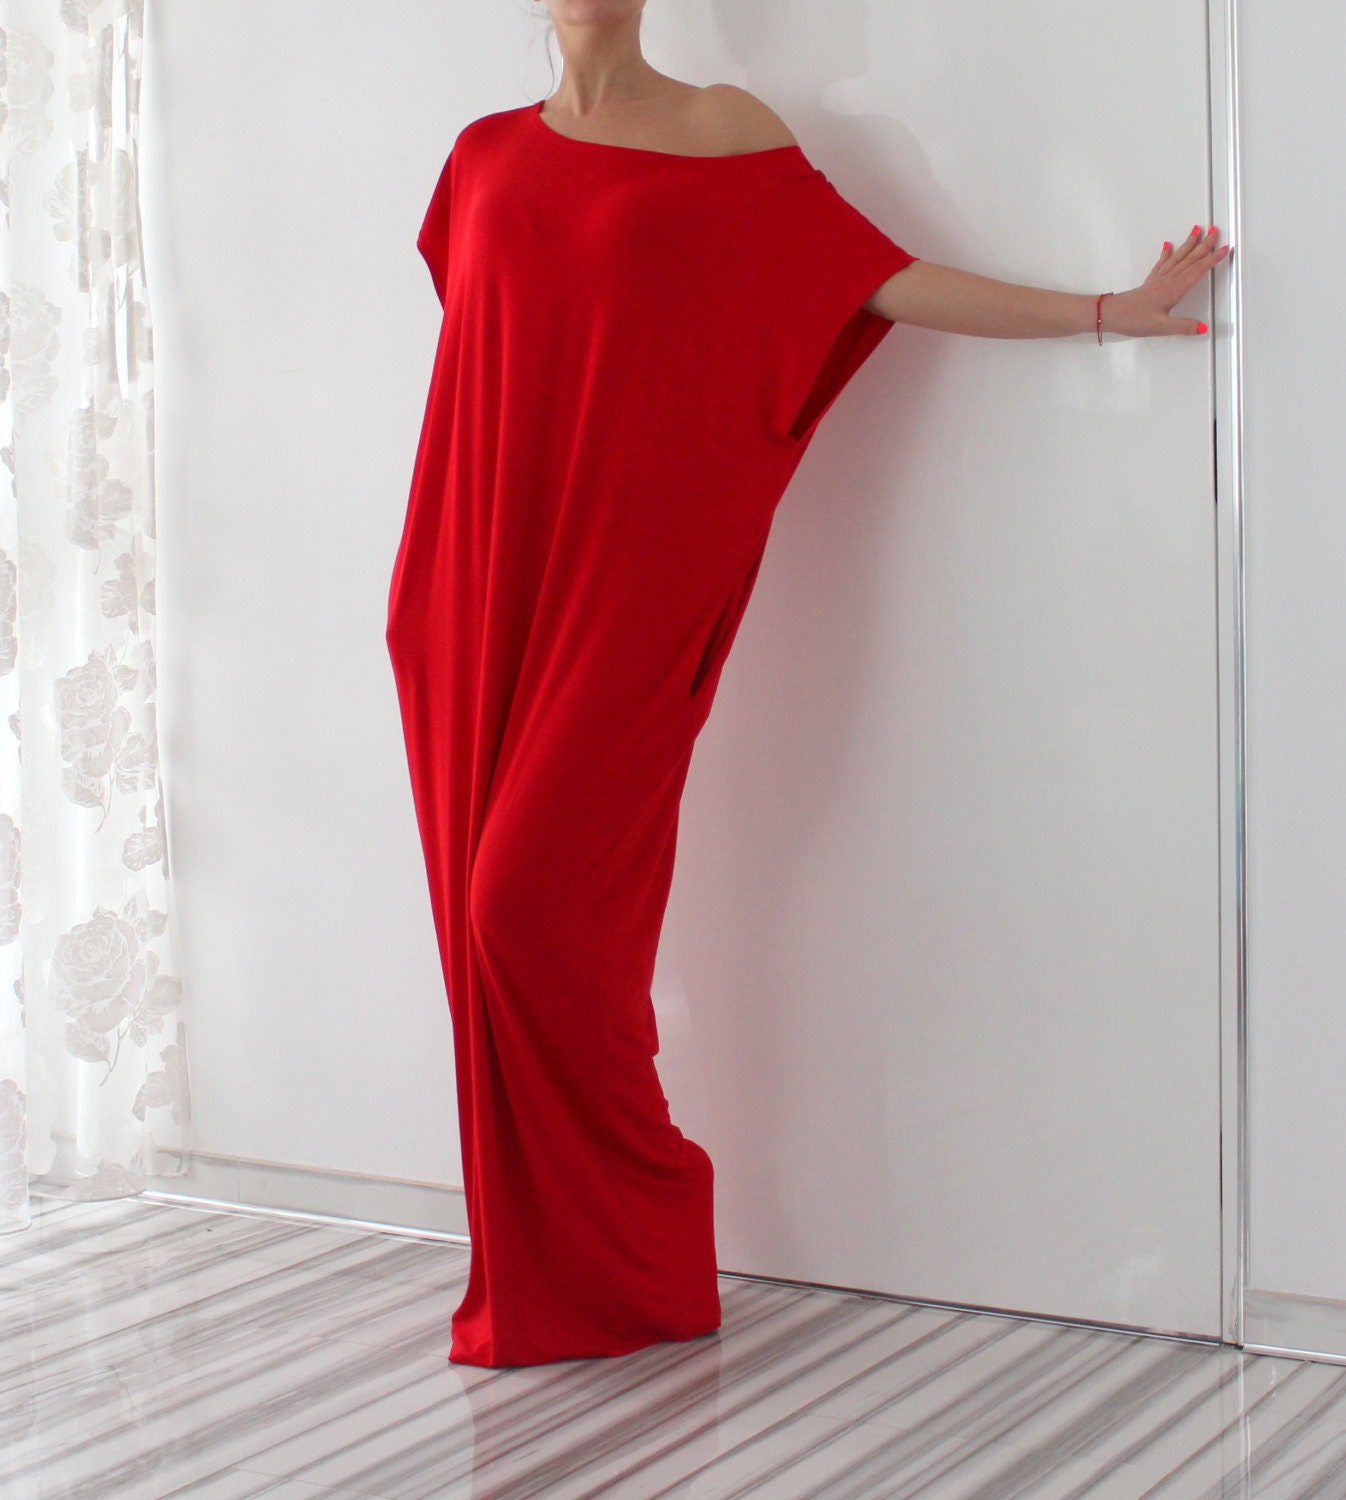 Red Valentine Dress, Maxi Beach Off Shoulder Plus Size Clothing, Cover Up, Kaftan Gift